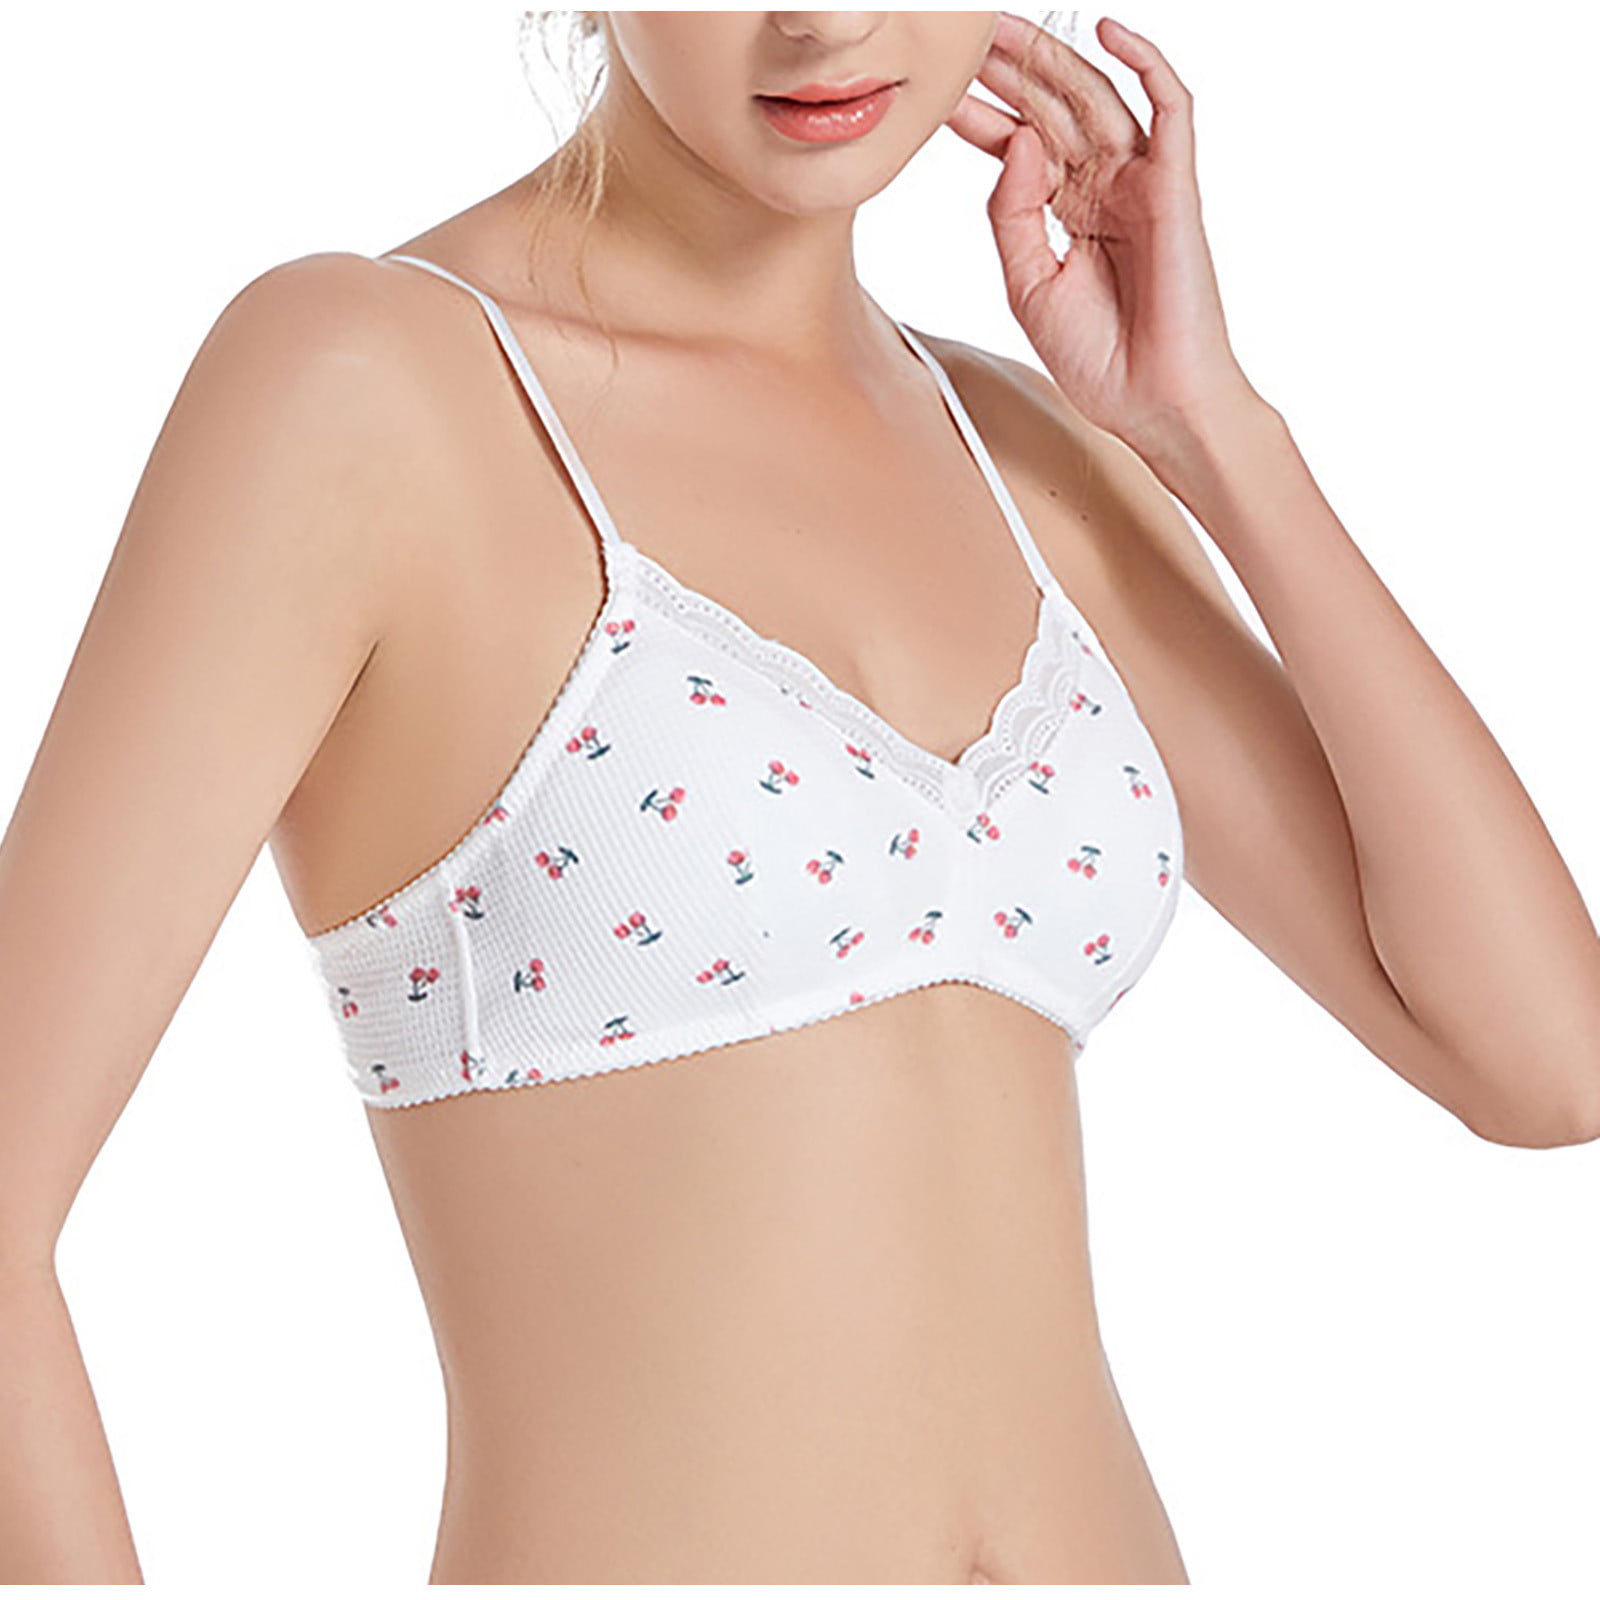 Free As Girlwire-free Cotton Training Bra For Girls 10-18 - Solid